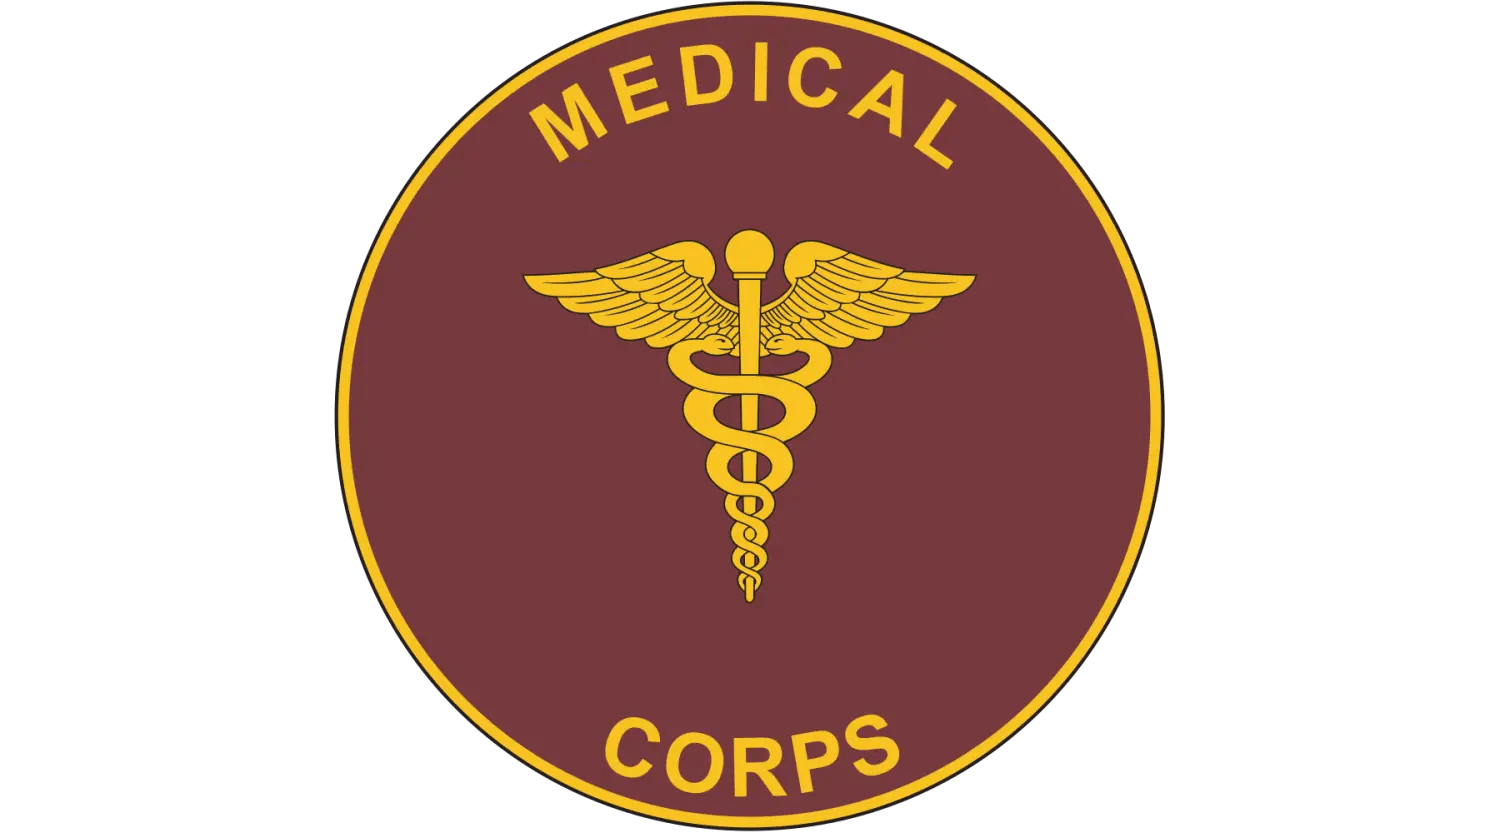 Providing Medical Care Since 1775 - A Brief History of the U.S. Army Medical Corps - Tactically Acquired